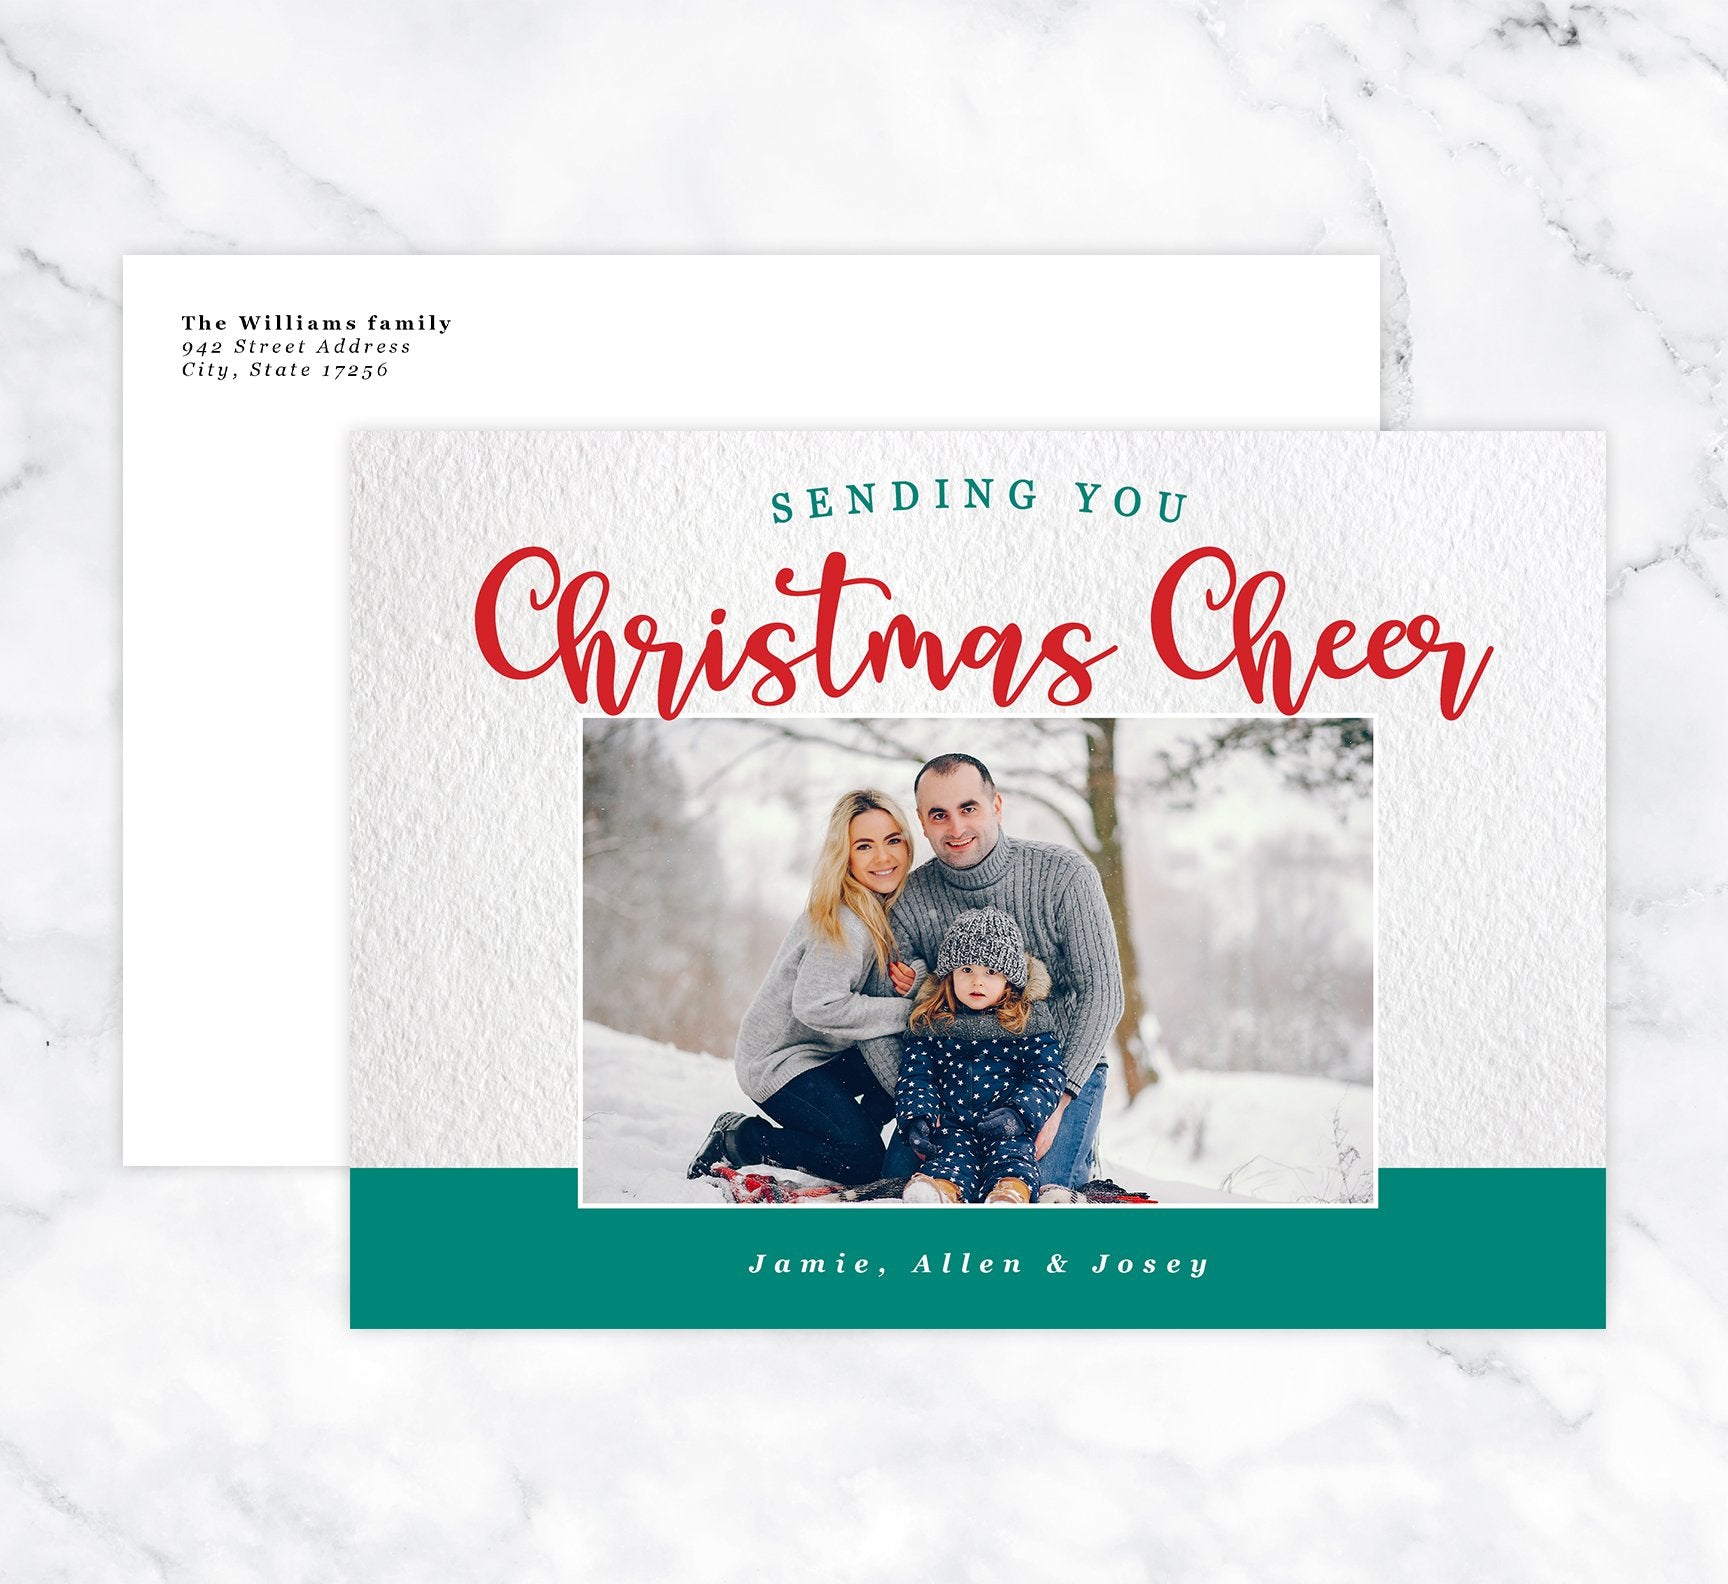 Christmas Cheer Holiday Card Mockup; Holiday card with envelope and return address printed on it. 